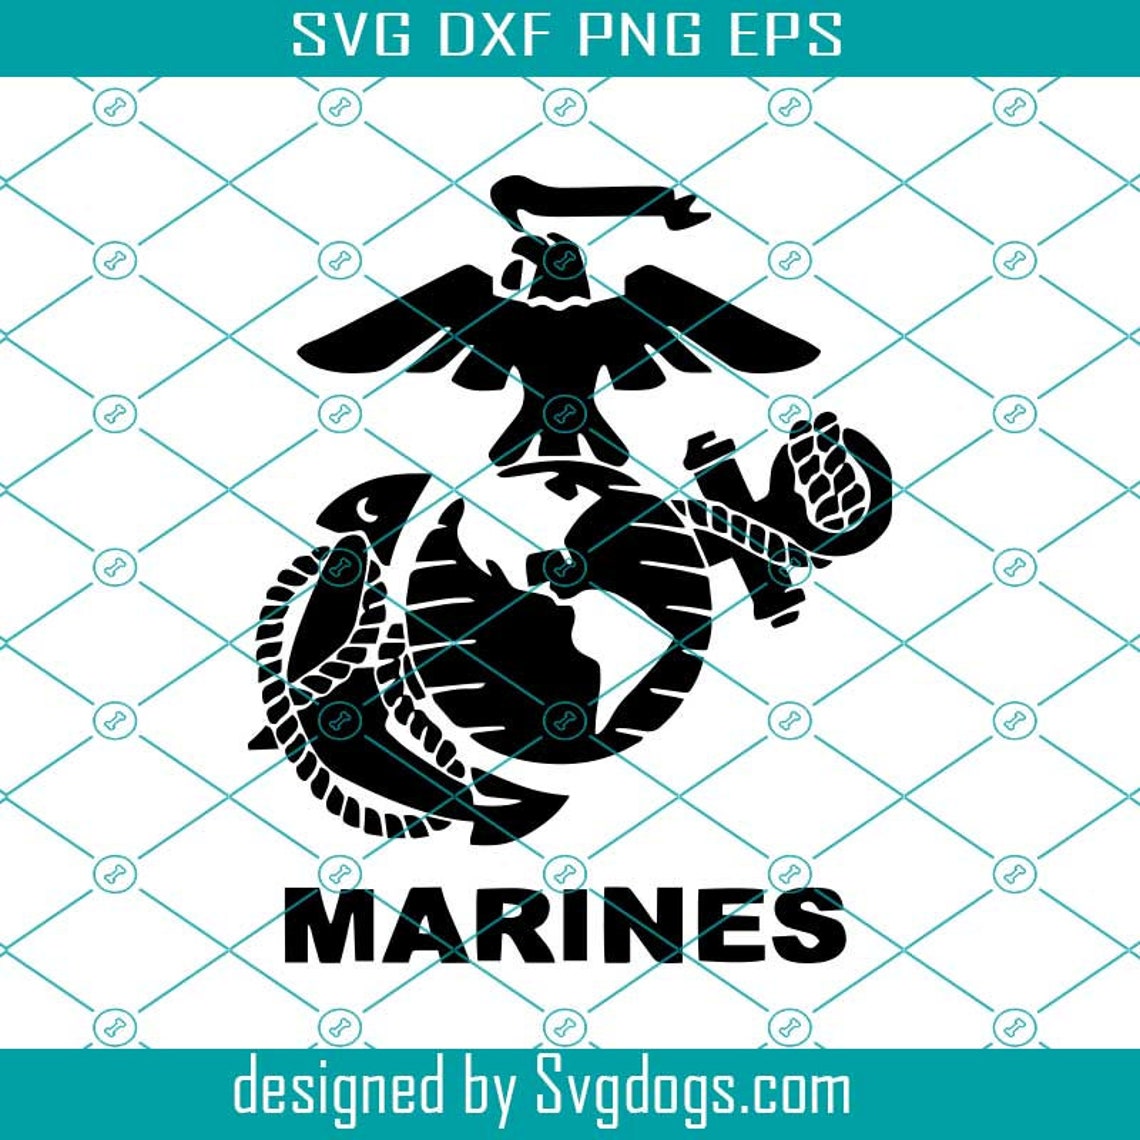 Marine Corps svg Marine Corps logo US Army svg Svg For | Etsy